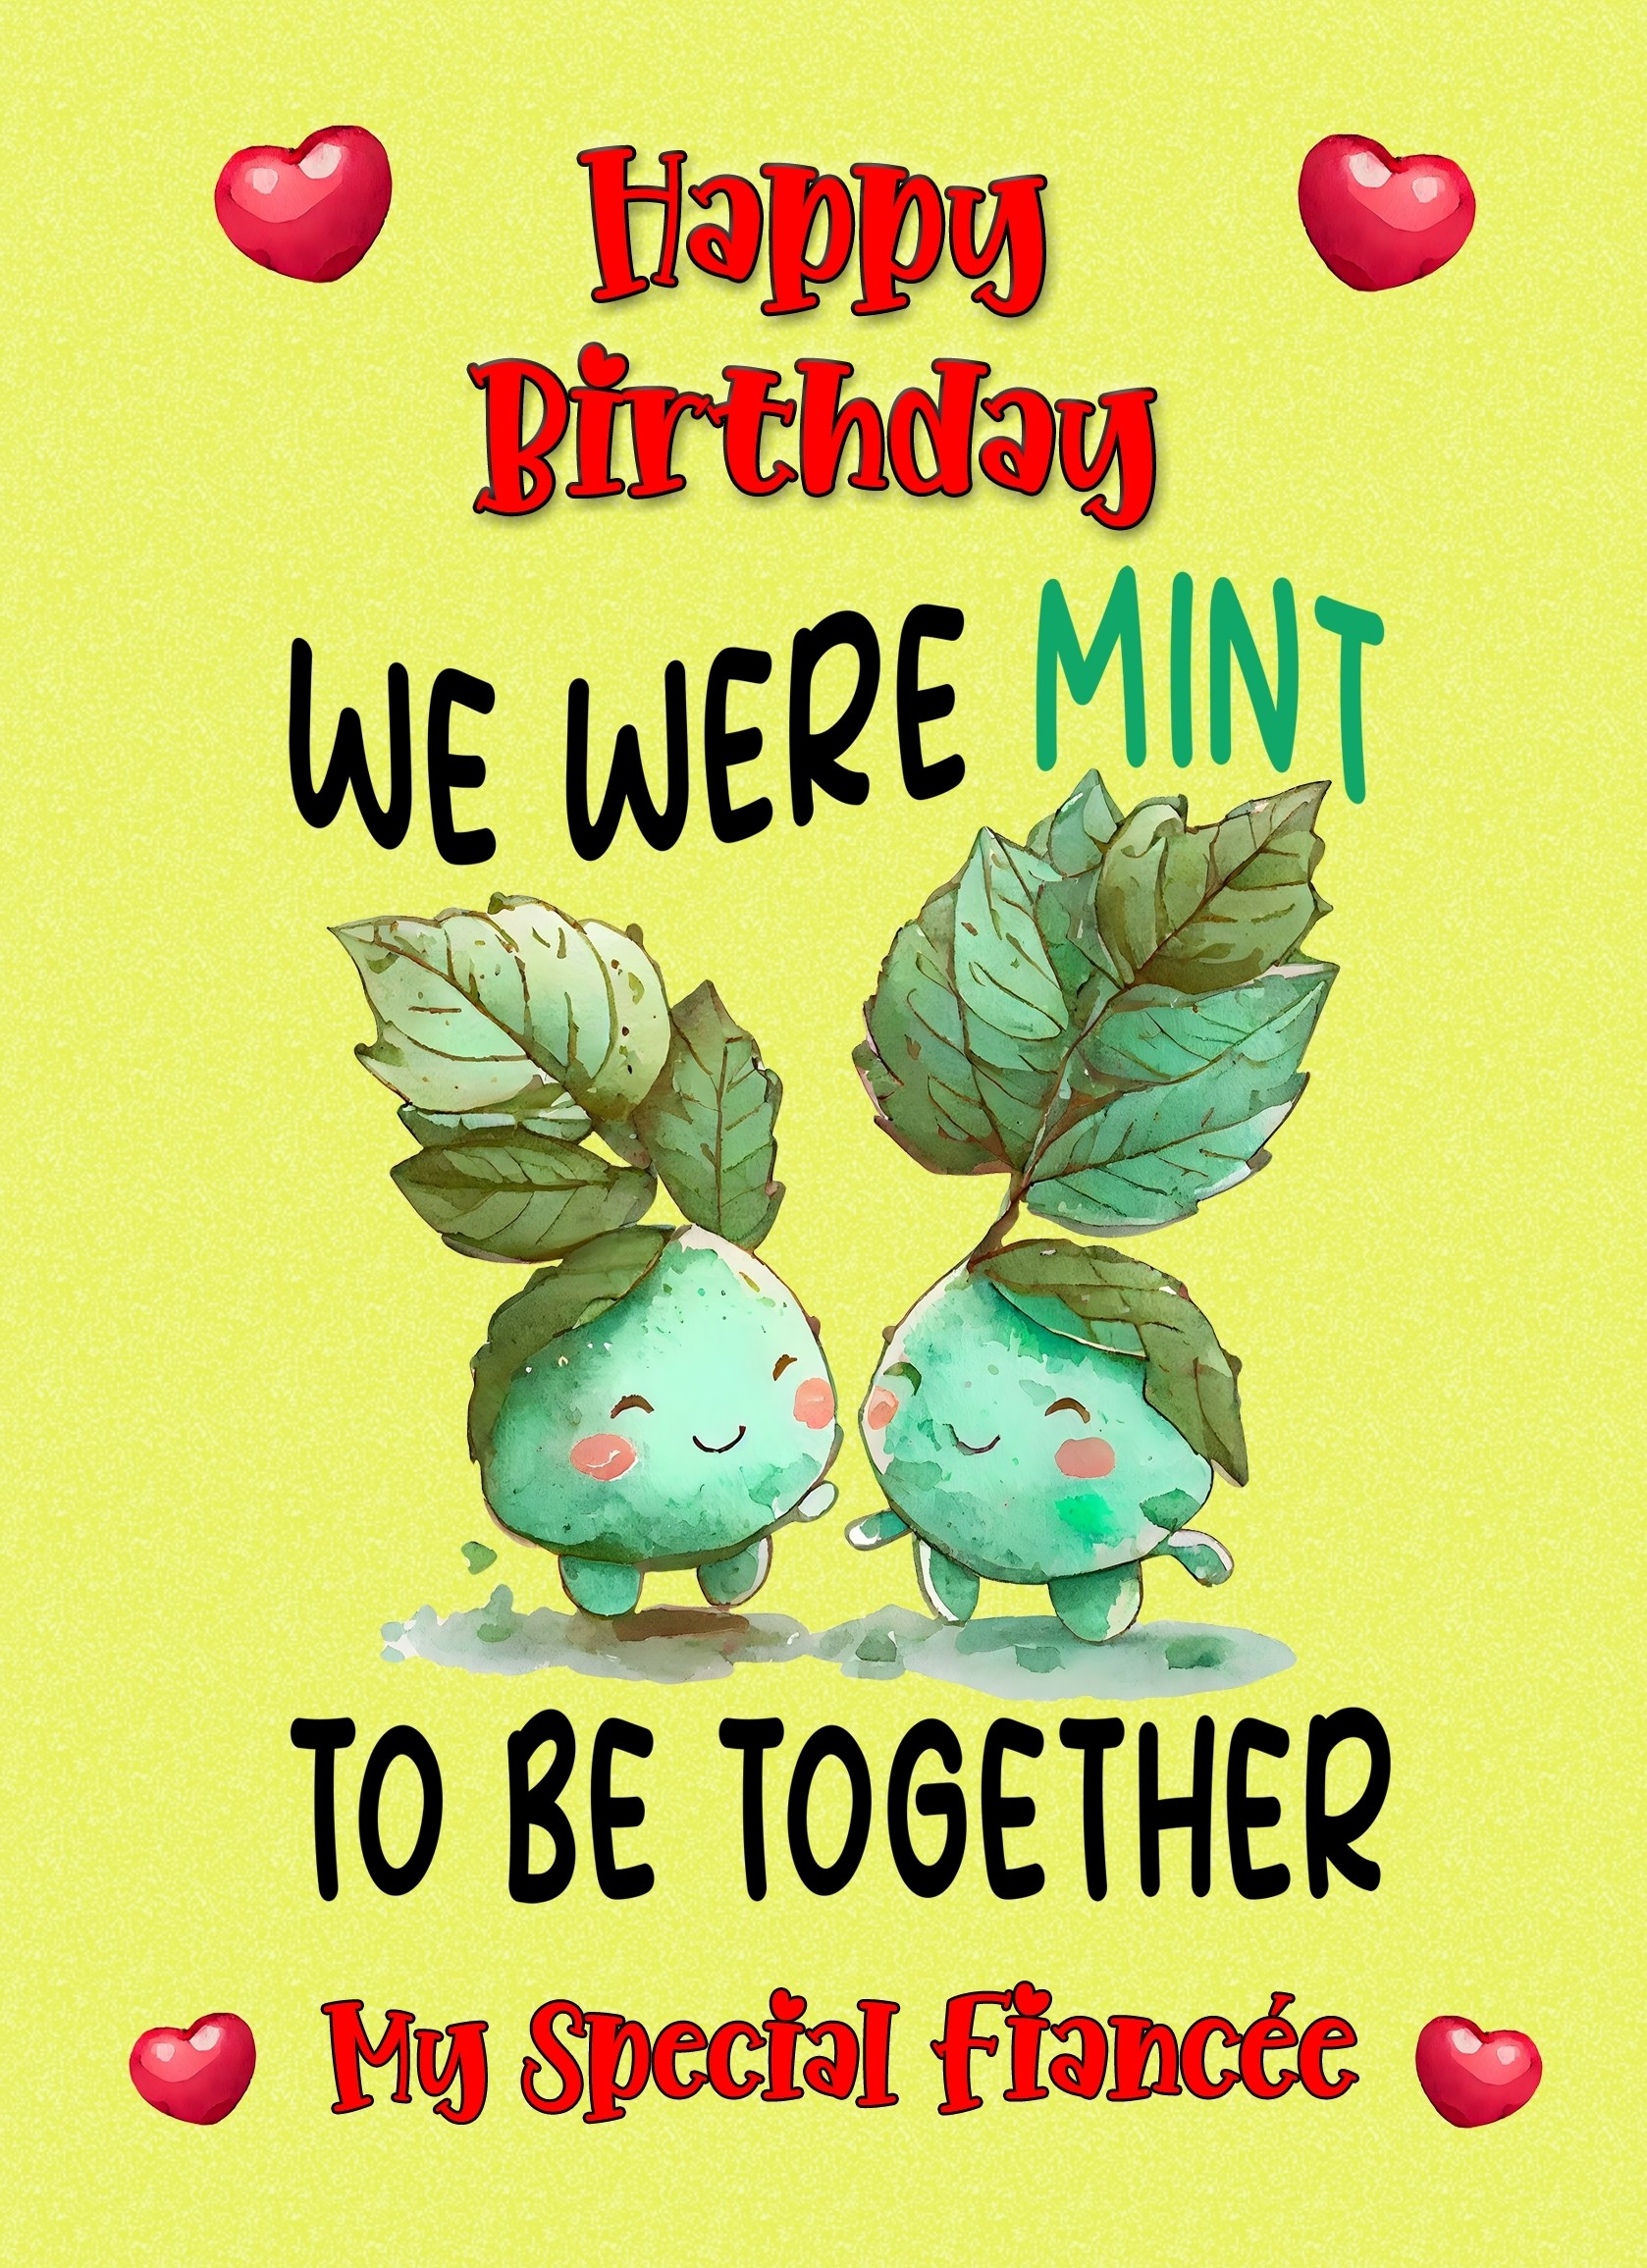 Funny Pun Romantic Birthday Card for Fiancee (Mint to Be)